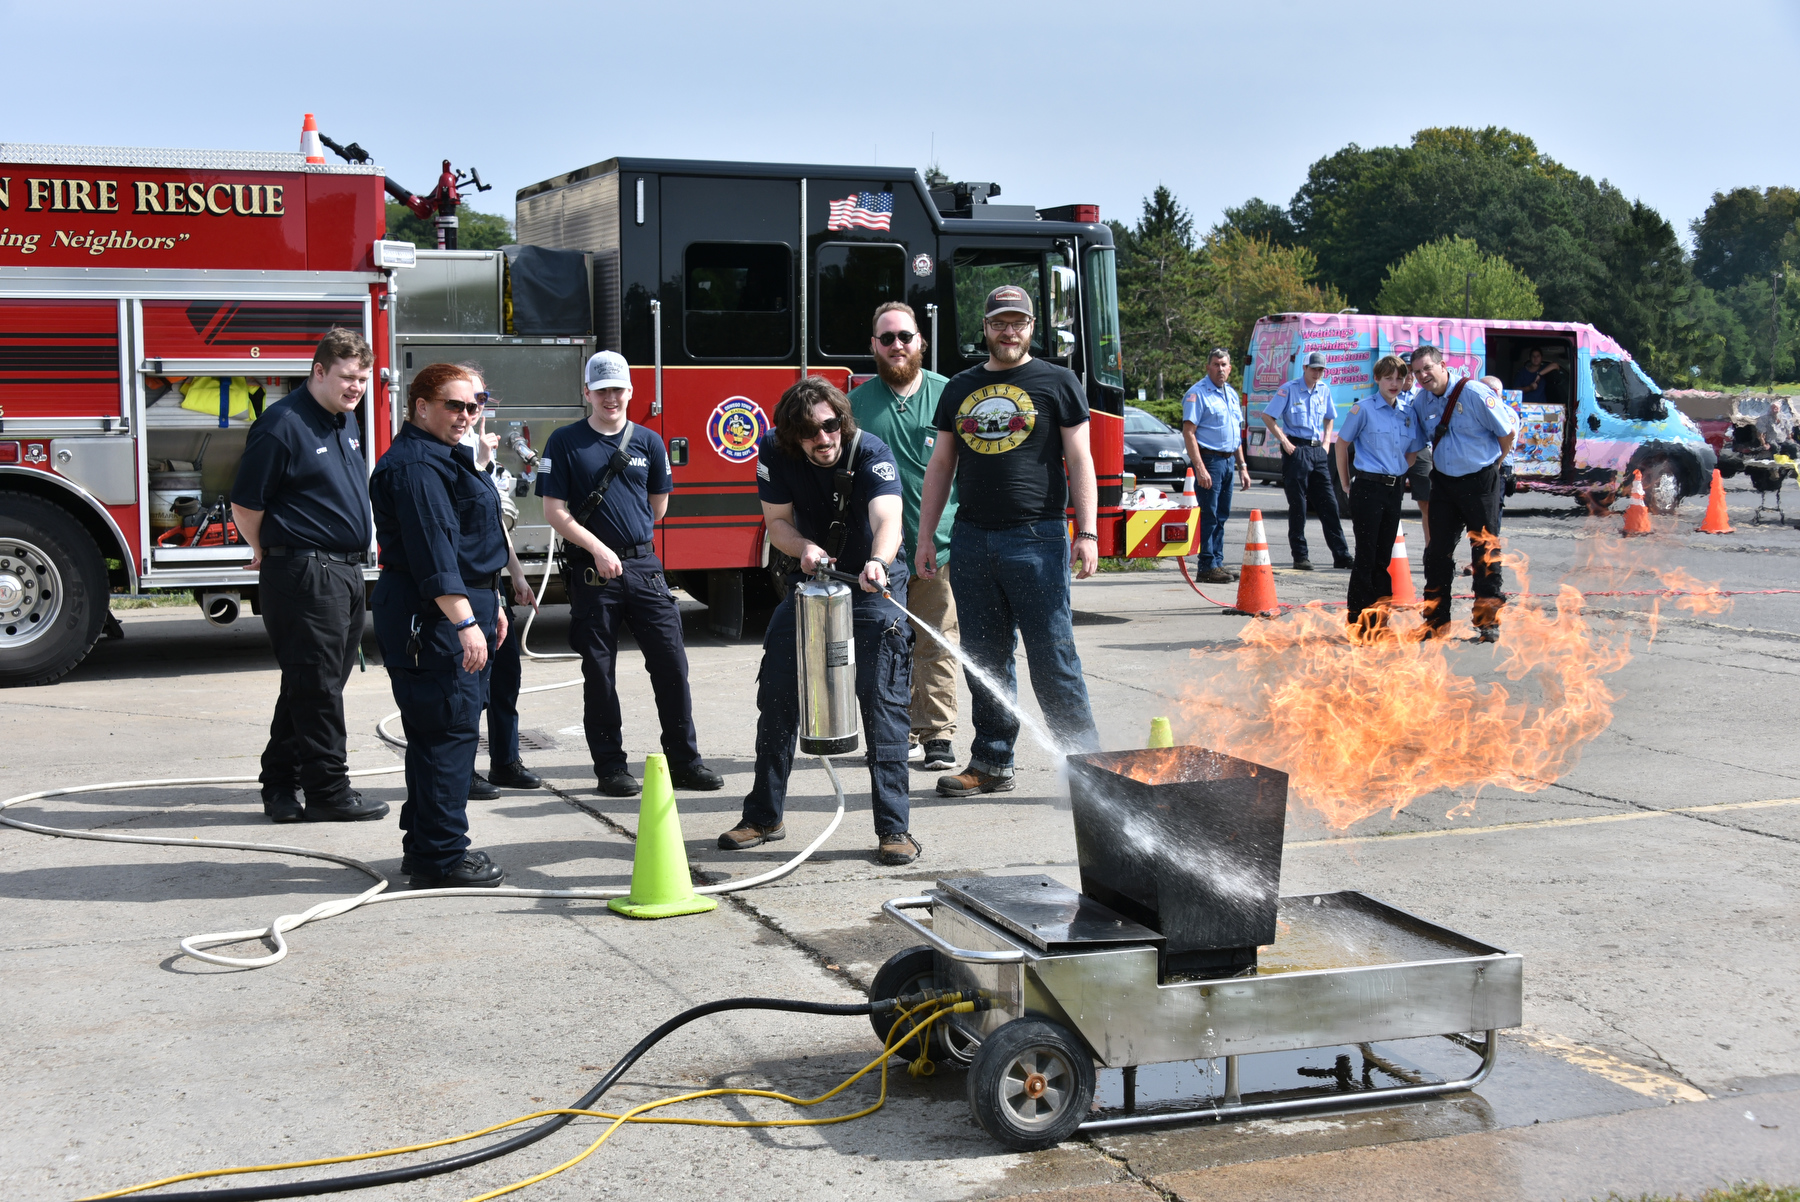 Fire extinguisher practice and hands-on demonstrations were part of Fire Safety Day on Sept. 23. Students had the opportunity to practice putting out live fires with portable fire extinguishers. The event hosted by Facilities Services, University Police and Oswego Town Fire Department was held in the Culkin Hall parking lot.